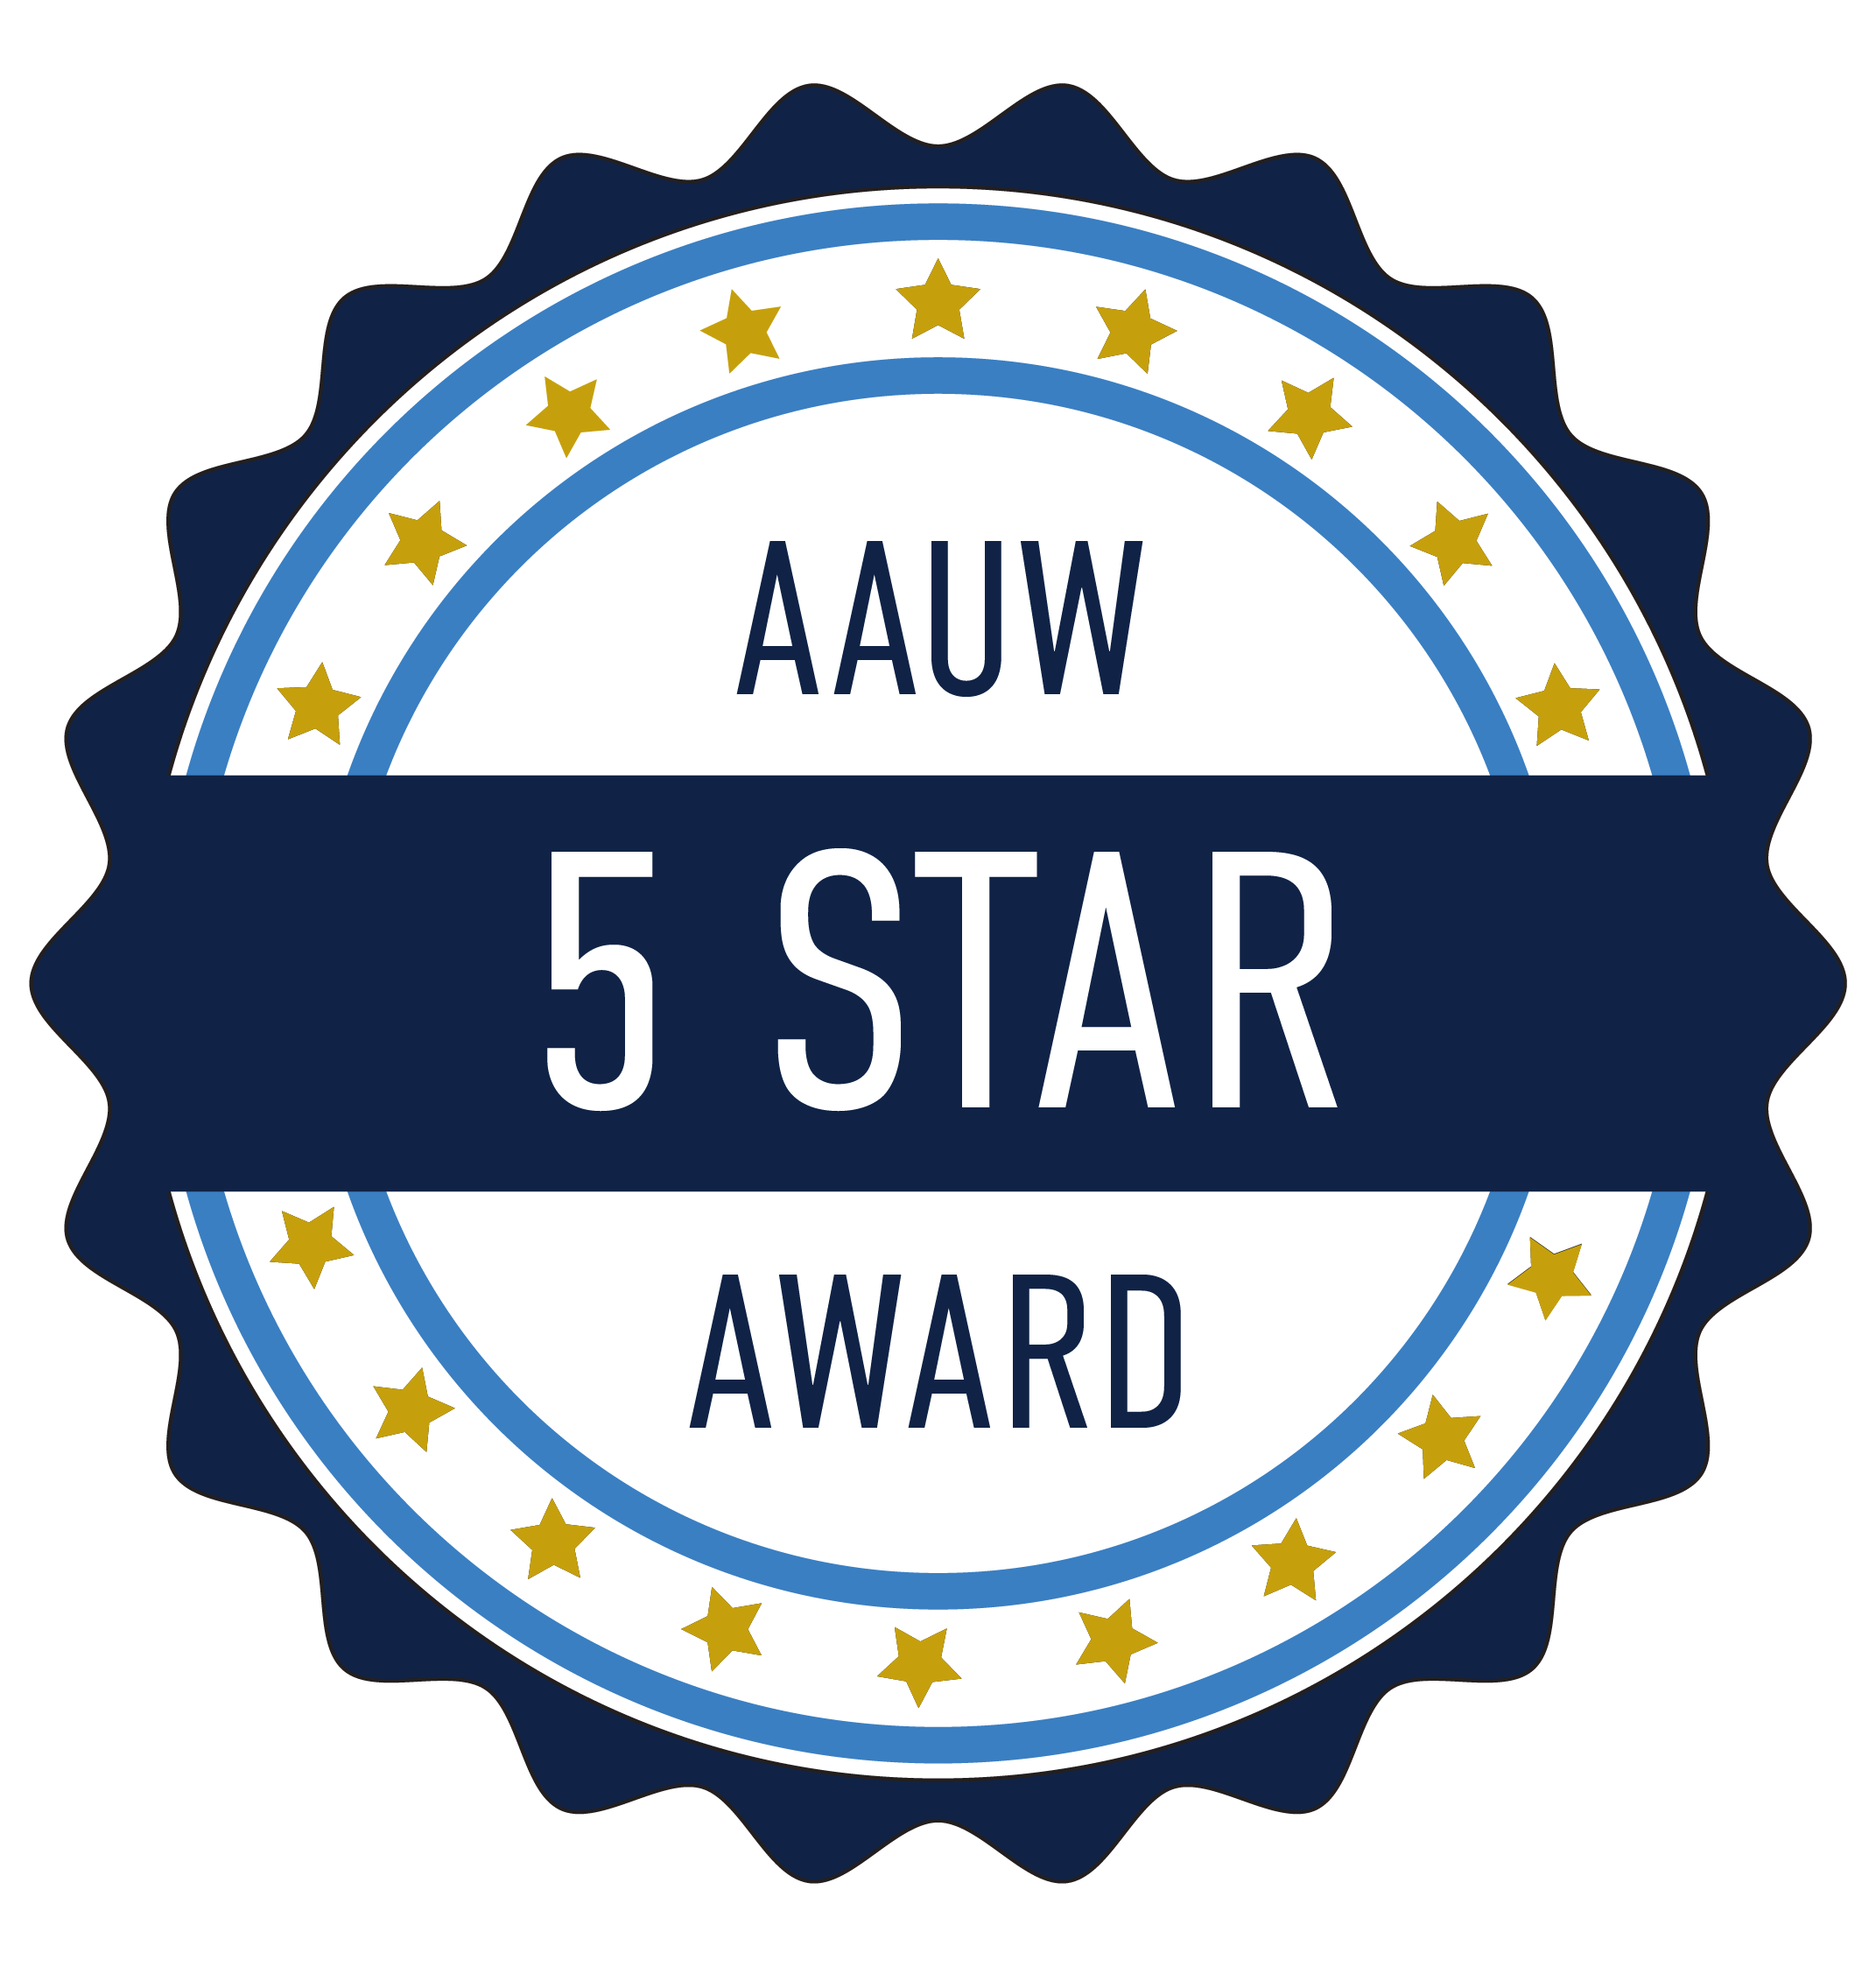 AAUW Stanwood Camano has earned the first three stars of the AAUW 5 star award.